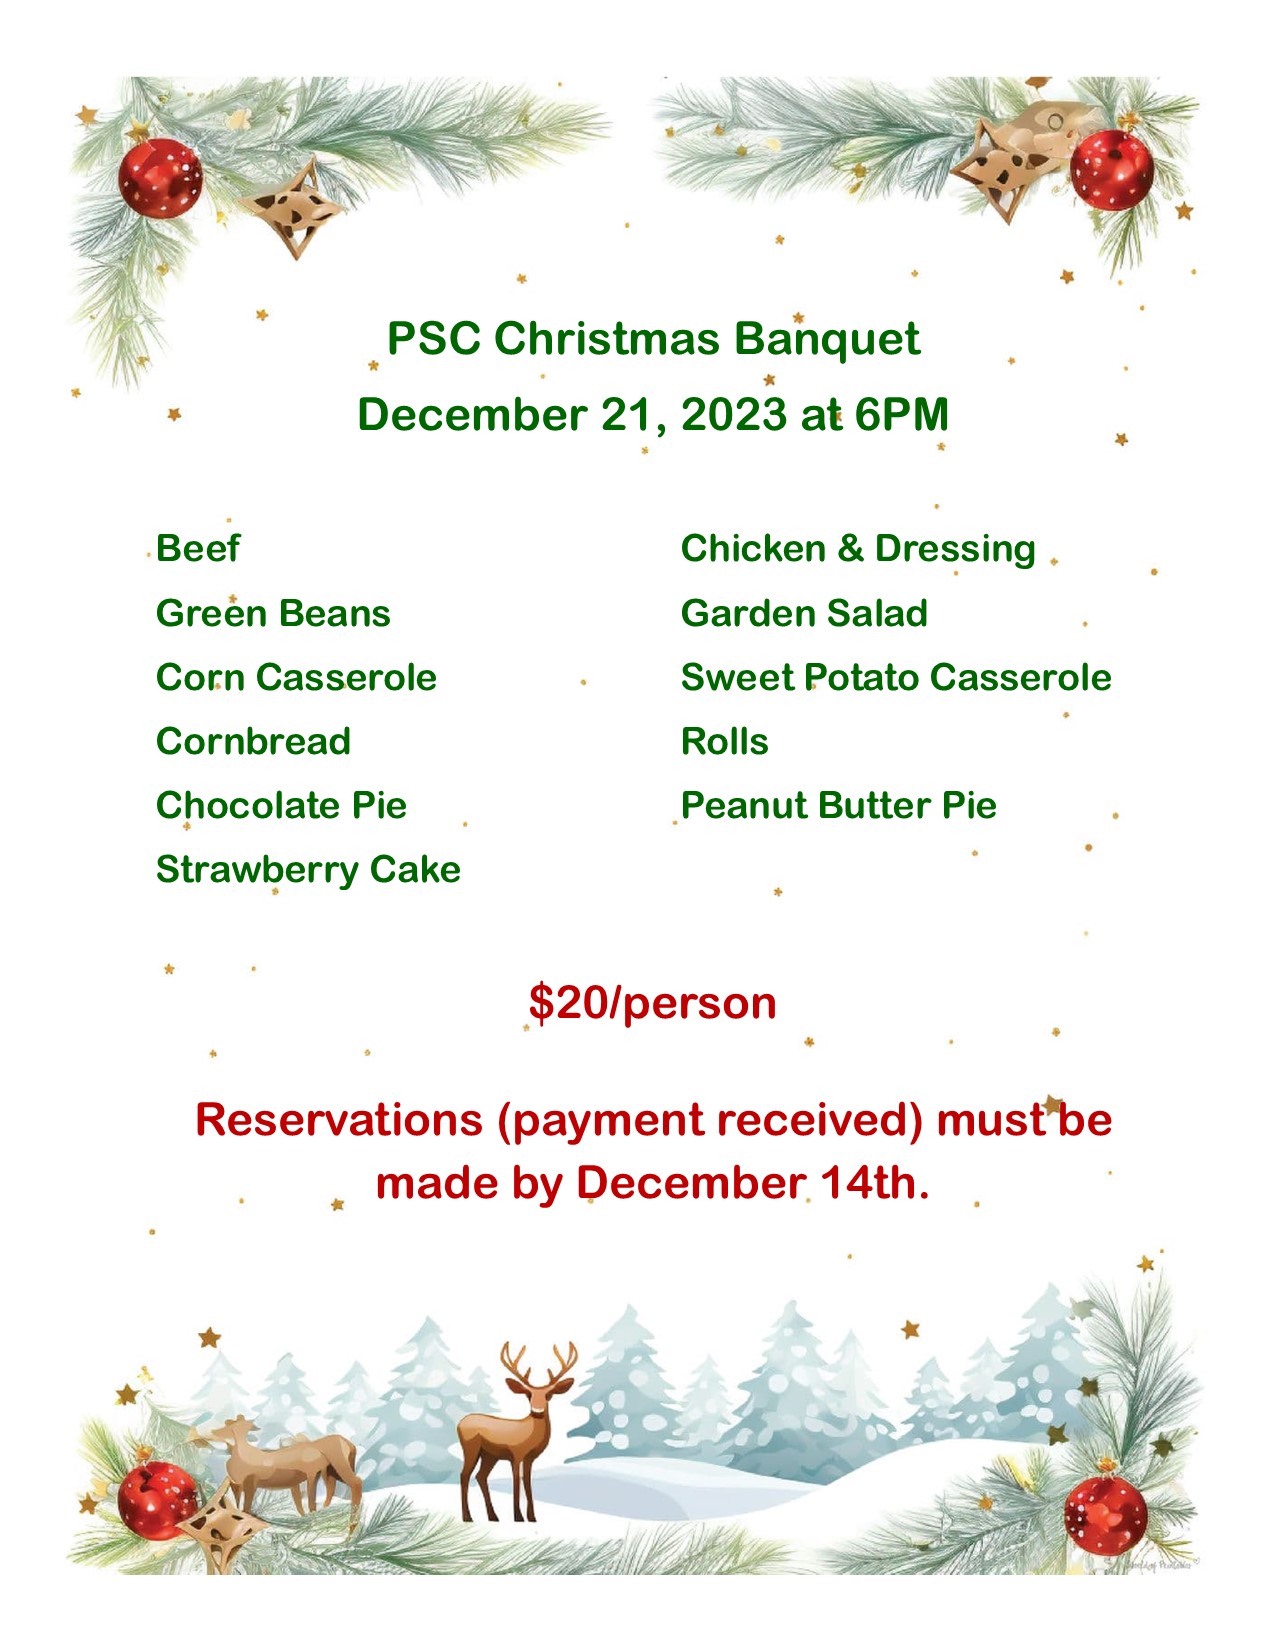 PSC Annual Christmas Banquet